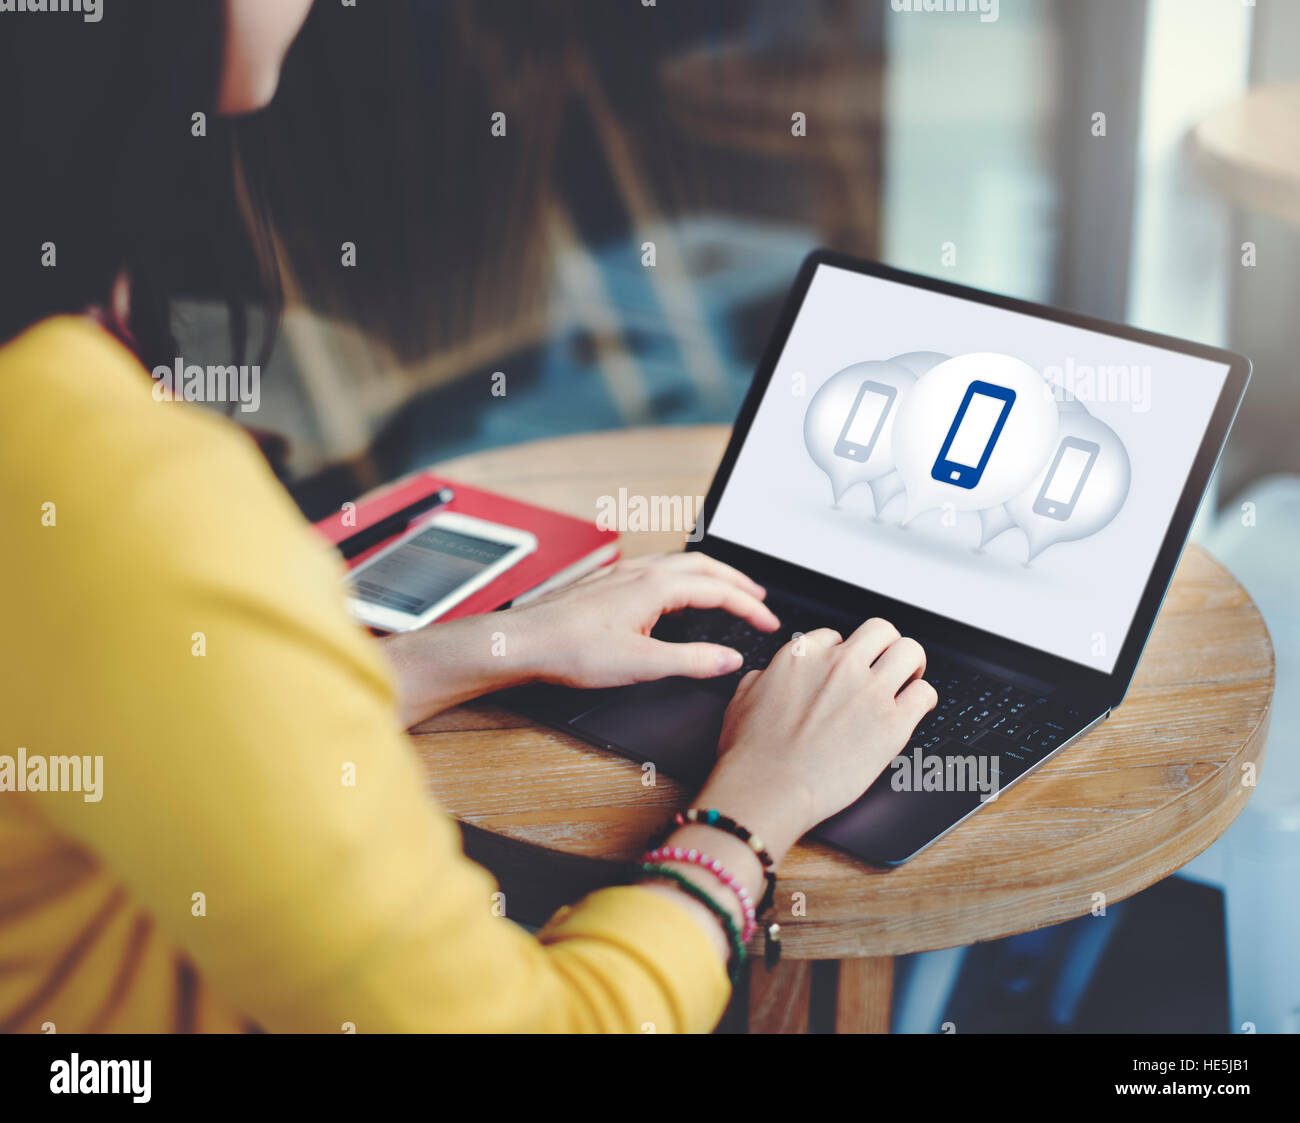 Smart Phone Mobile Internet Networking Talk Concept Stock Photo